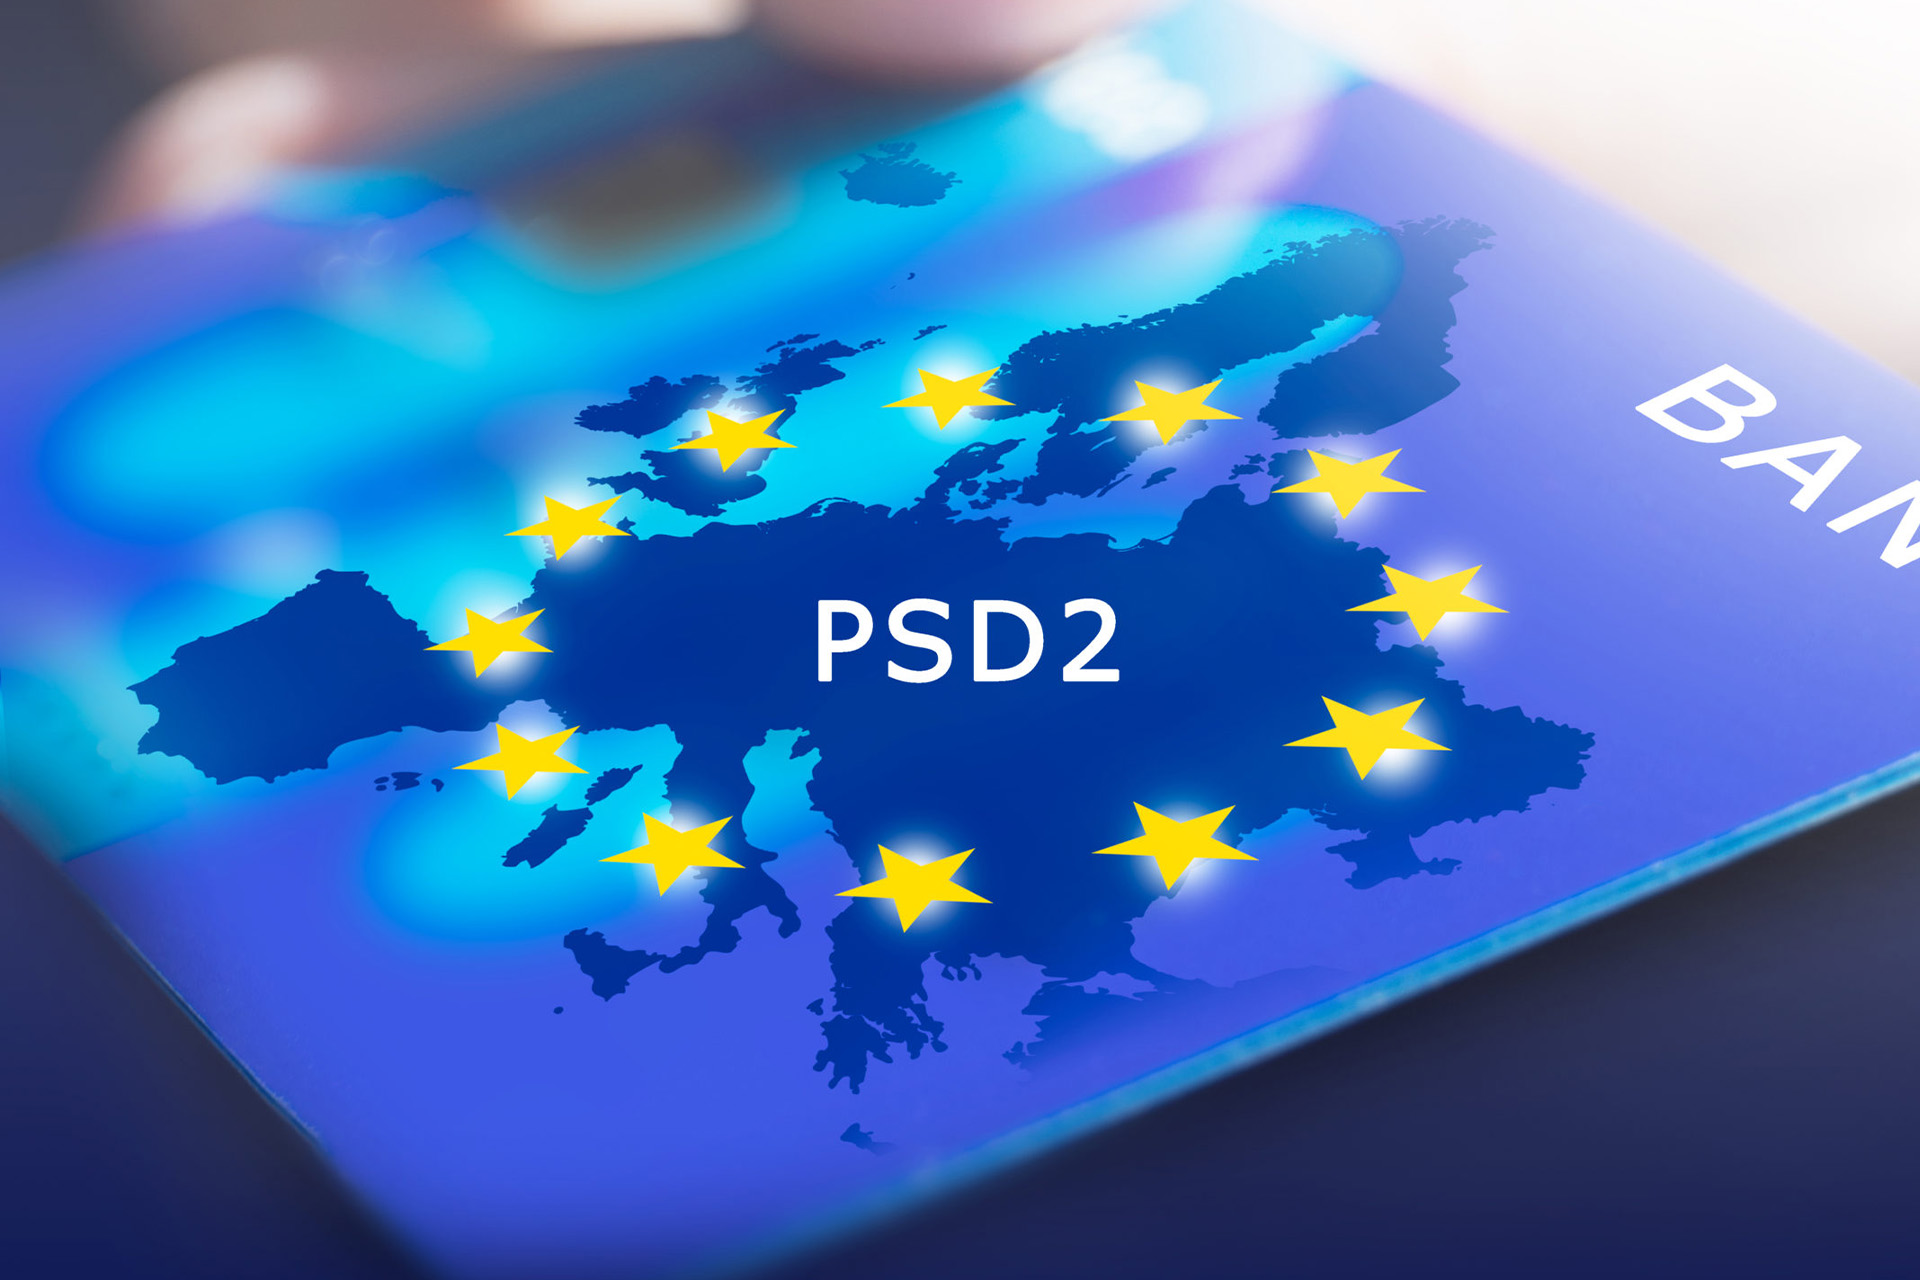 What is PSD2 and how does it work?